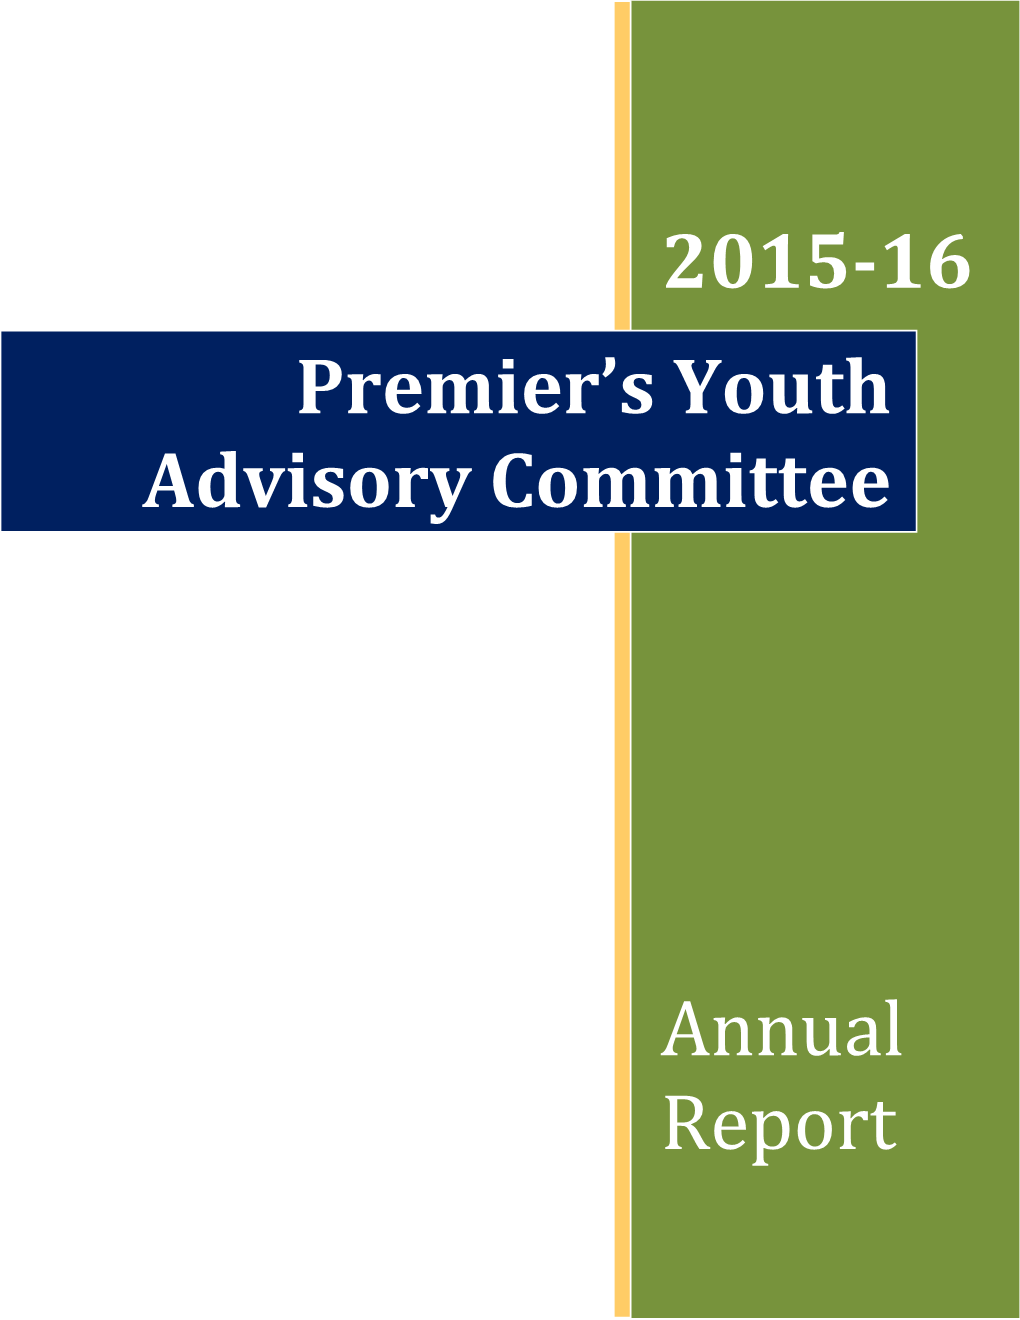 Premier's Youth Advisory Committee